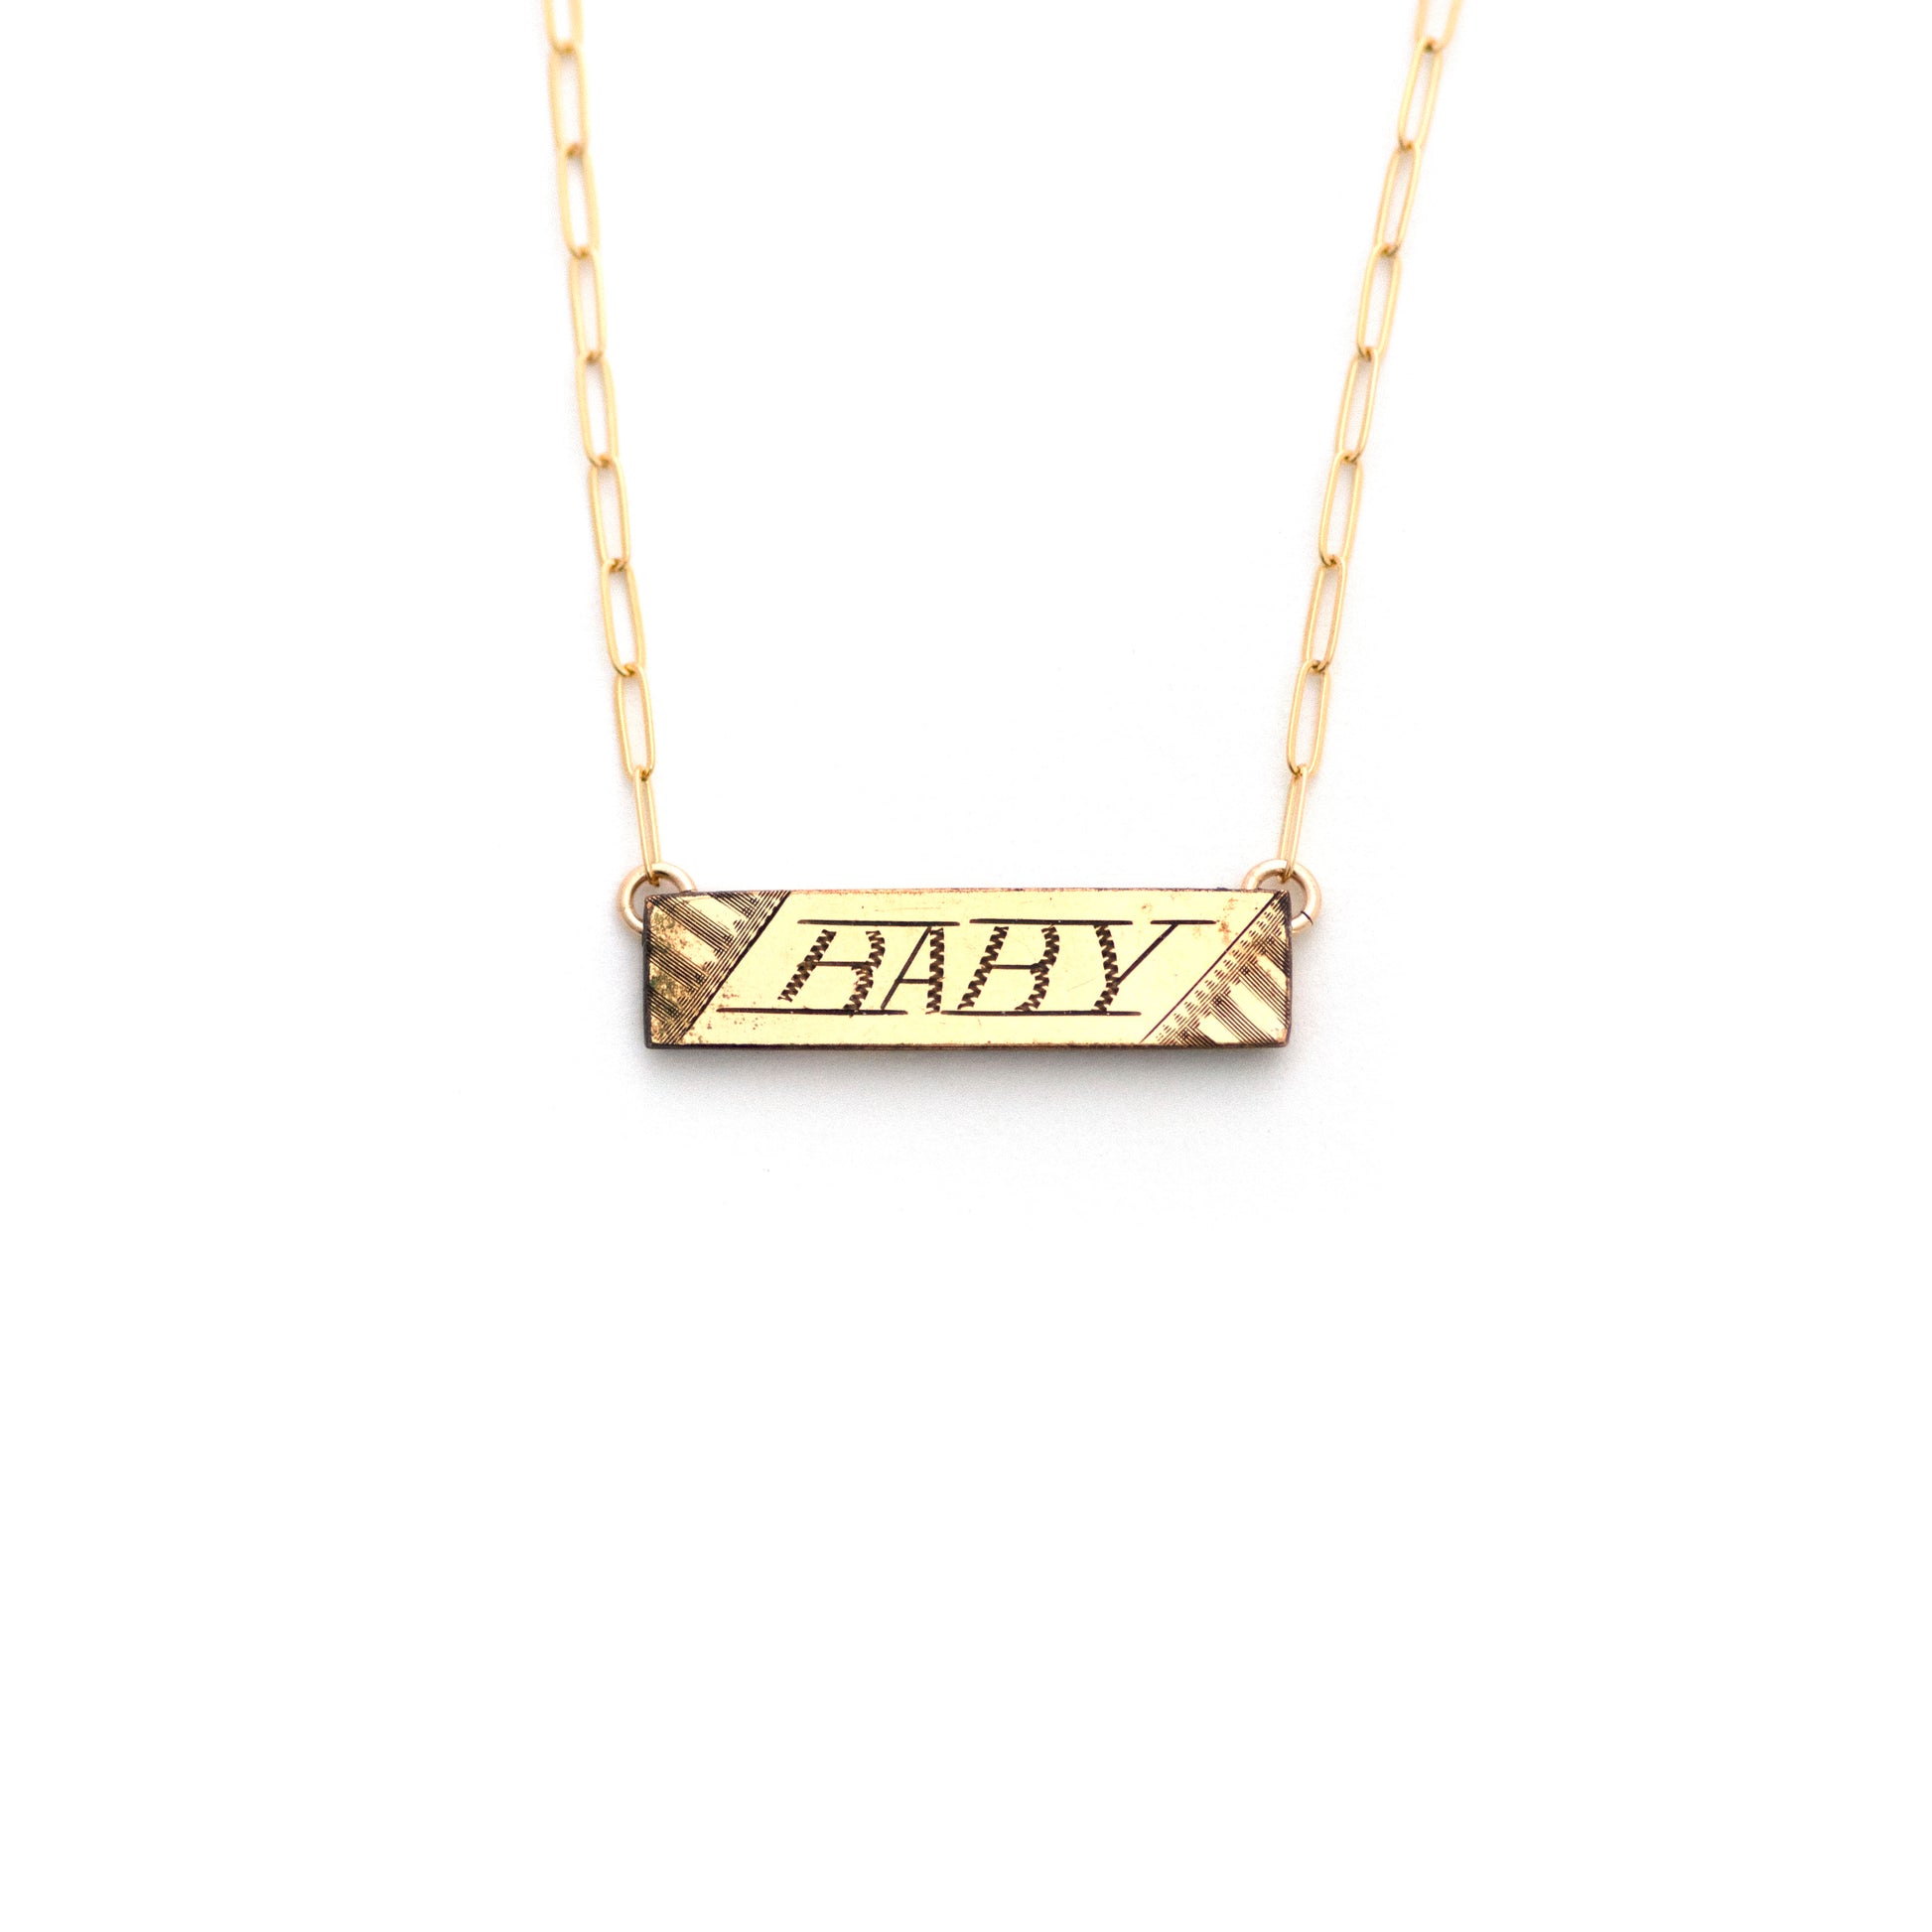 Antique BABY Gold Filled Bar Pin Necklace